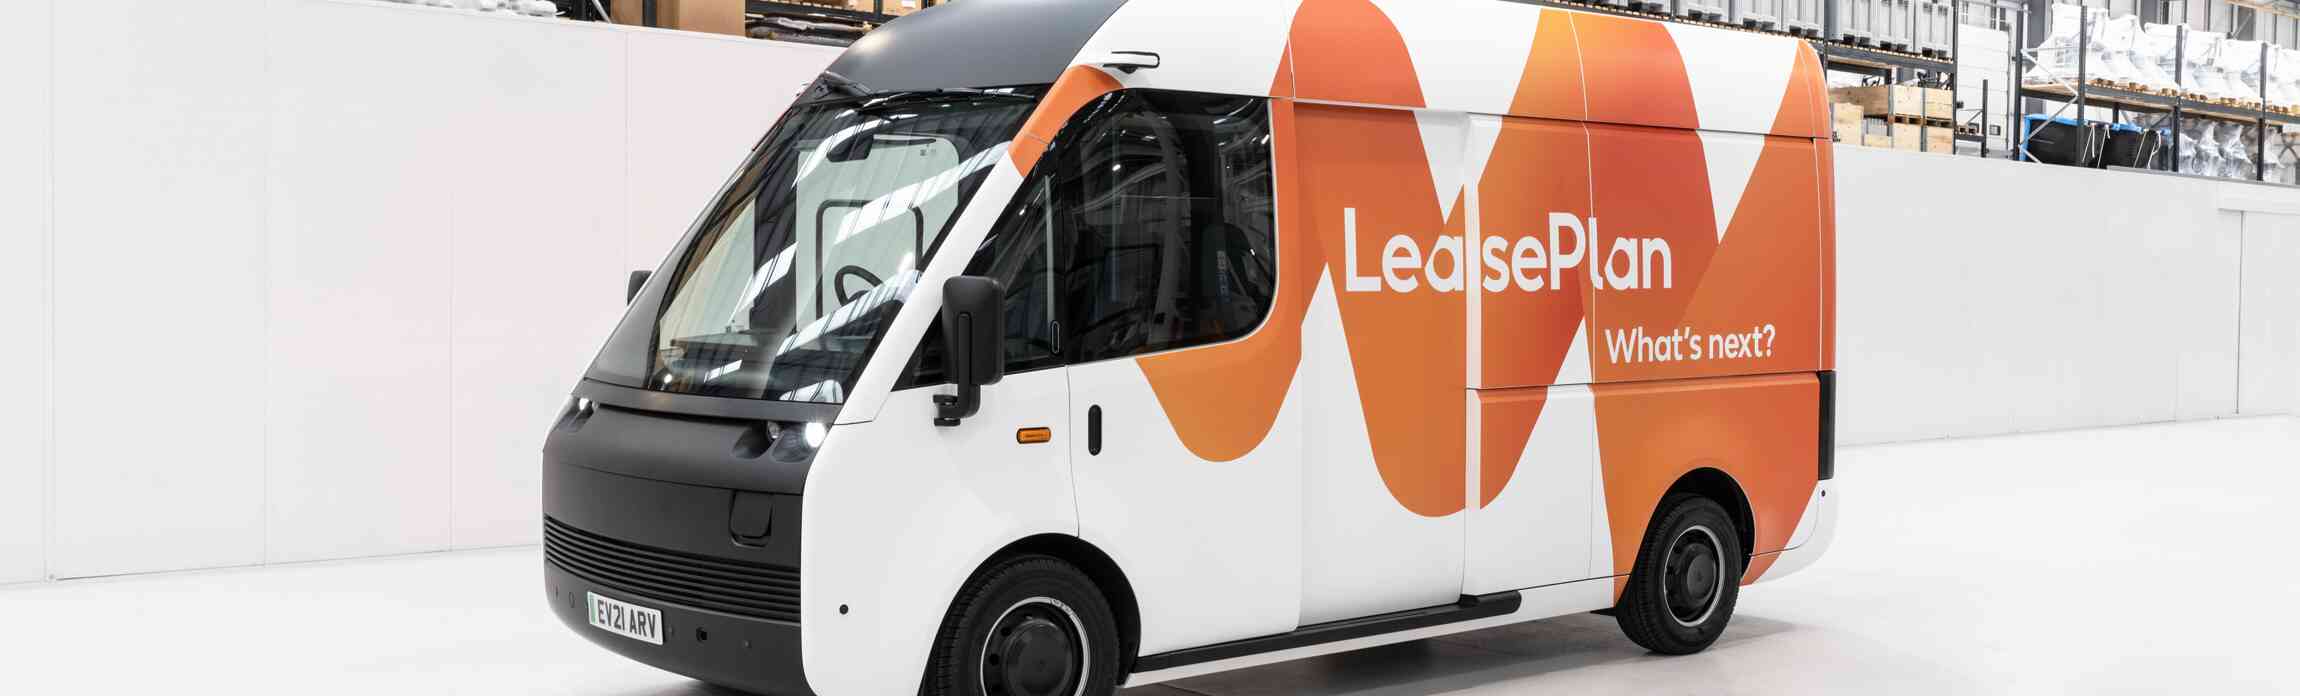 Arrival van with a LeasePlan logo on it